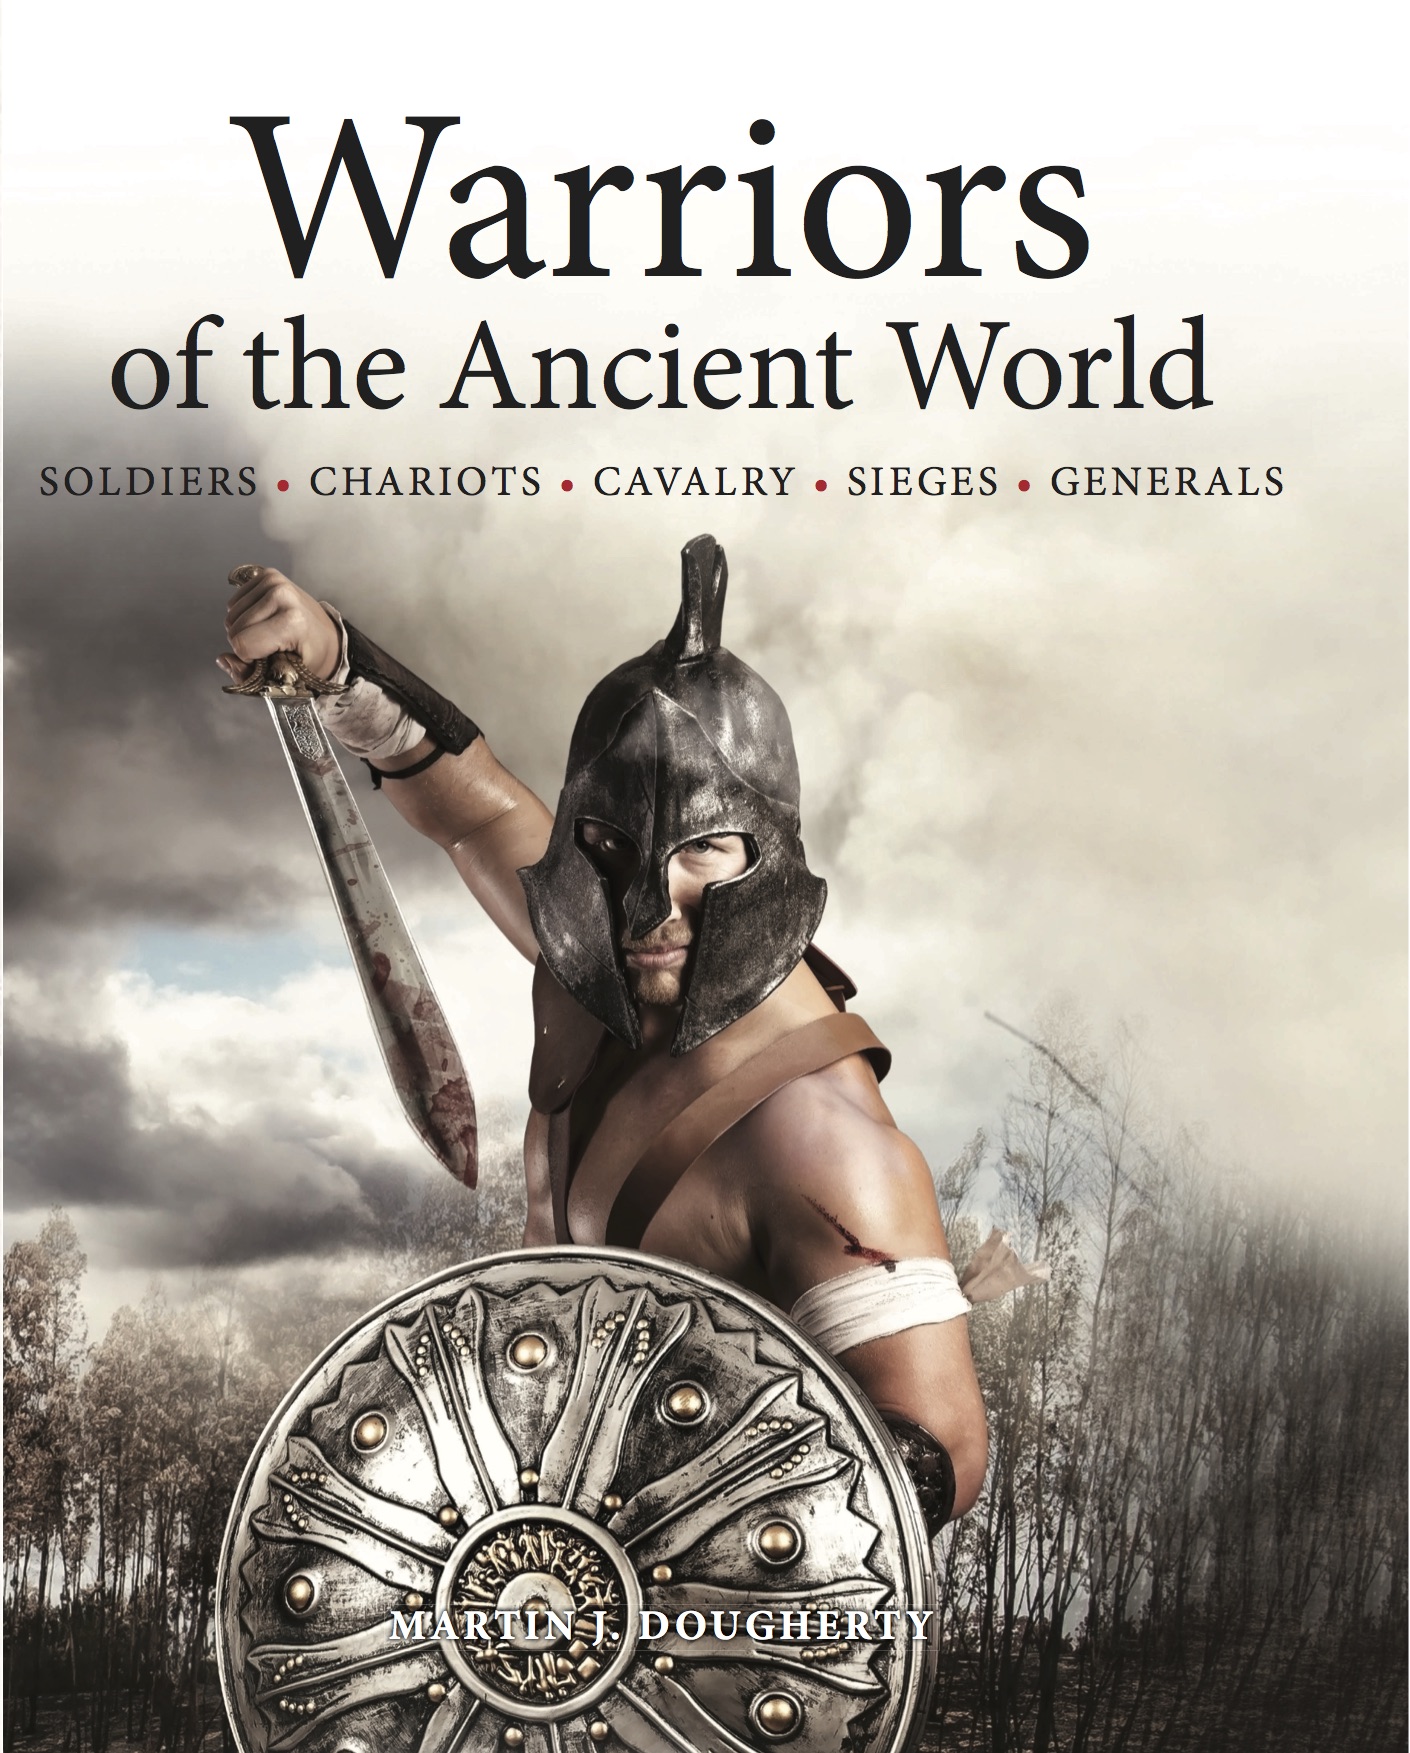 Warriors of the Ancient World